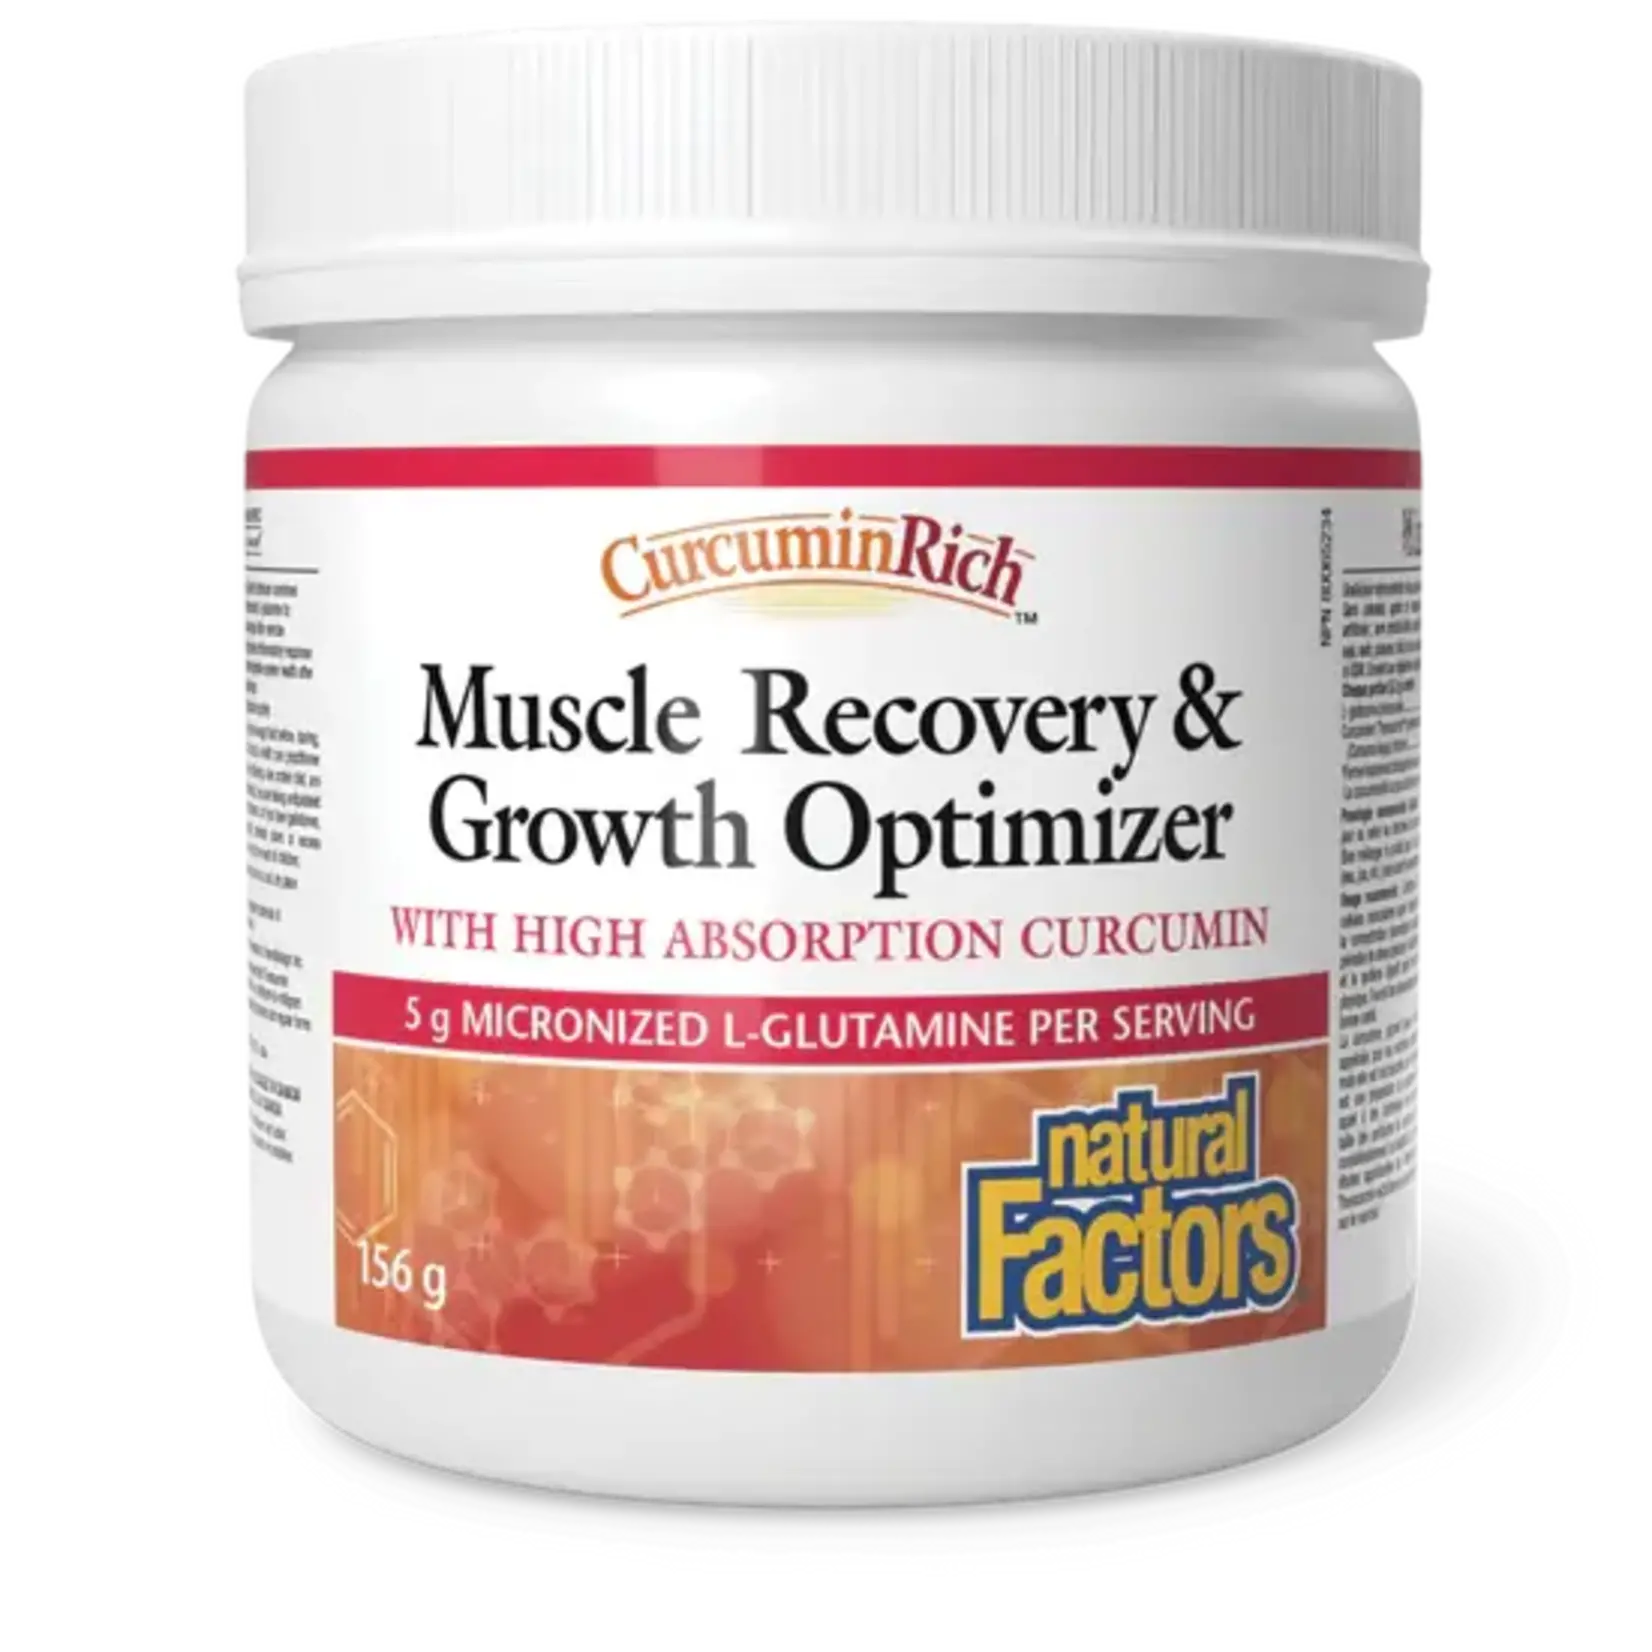 NATURAL FACTORS NATURAL FACTORS MUSCLE RECOVERY & GROWTH OPTIMIZER 156G